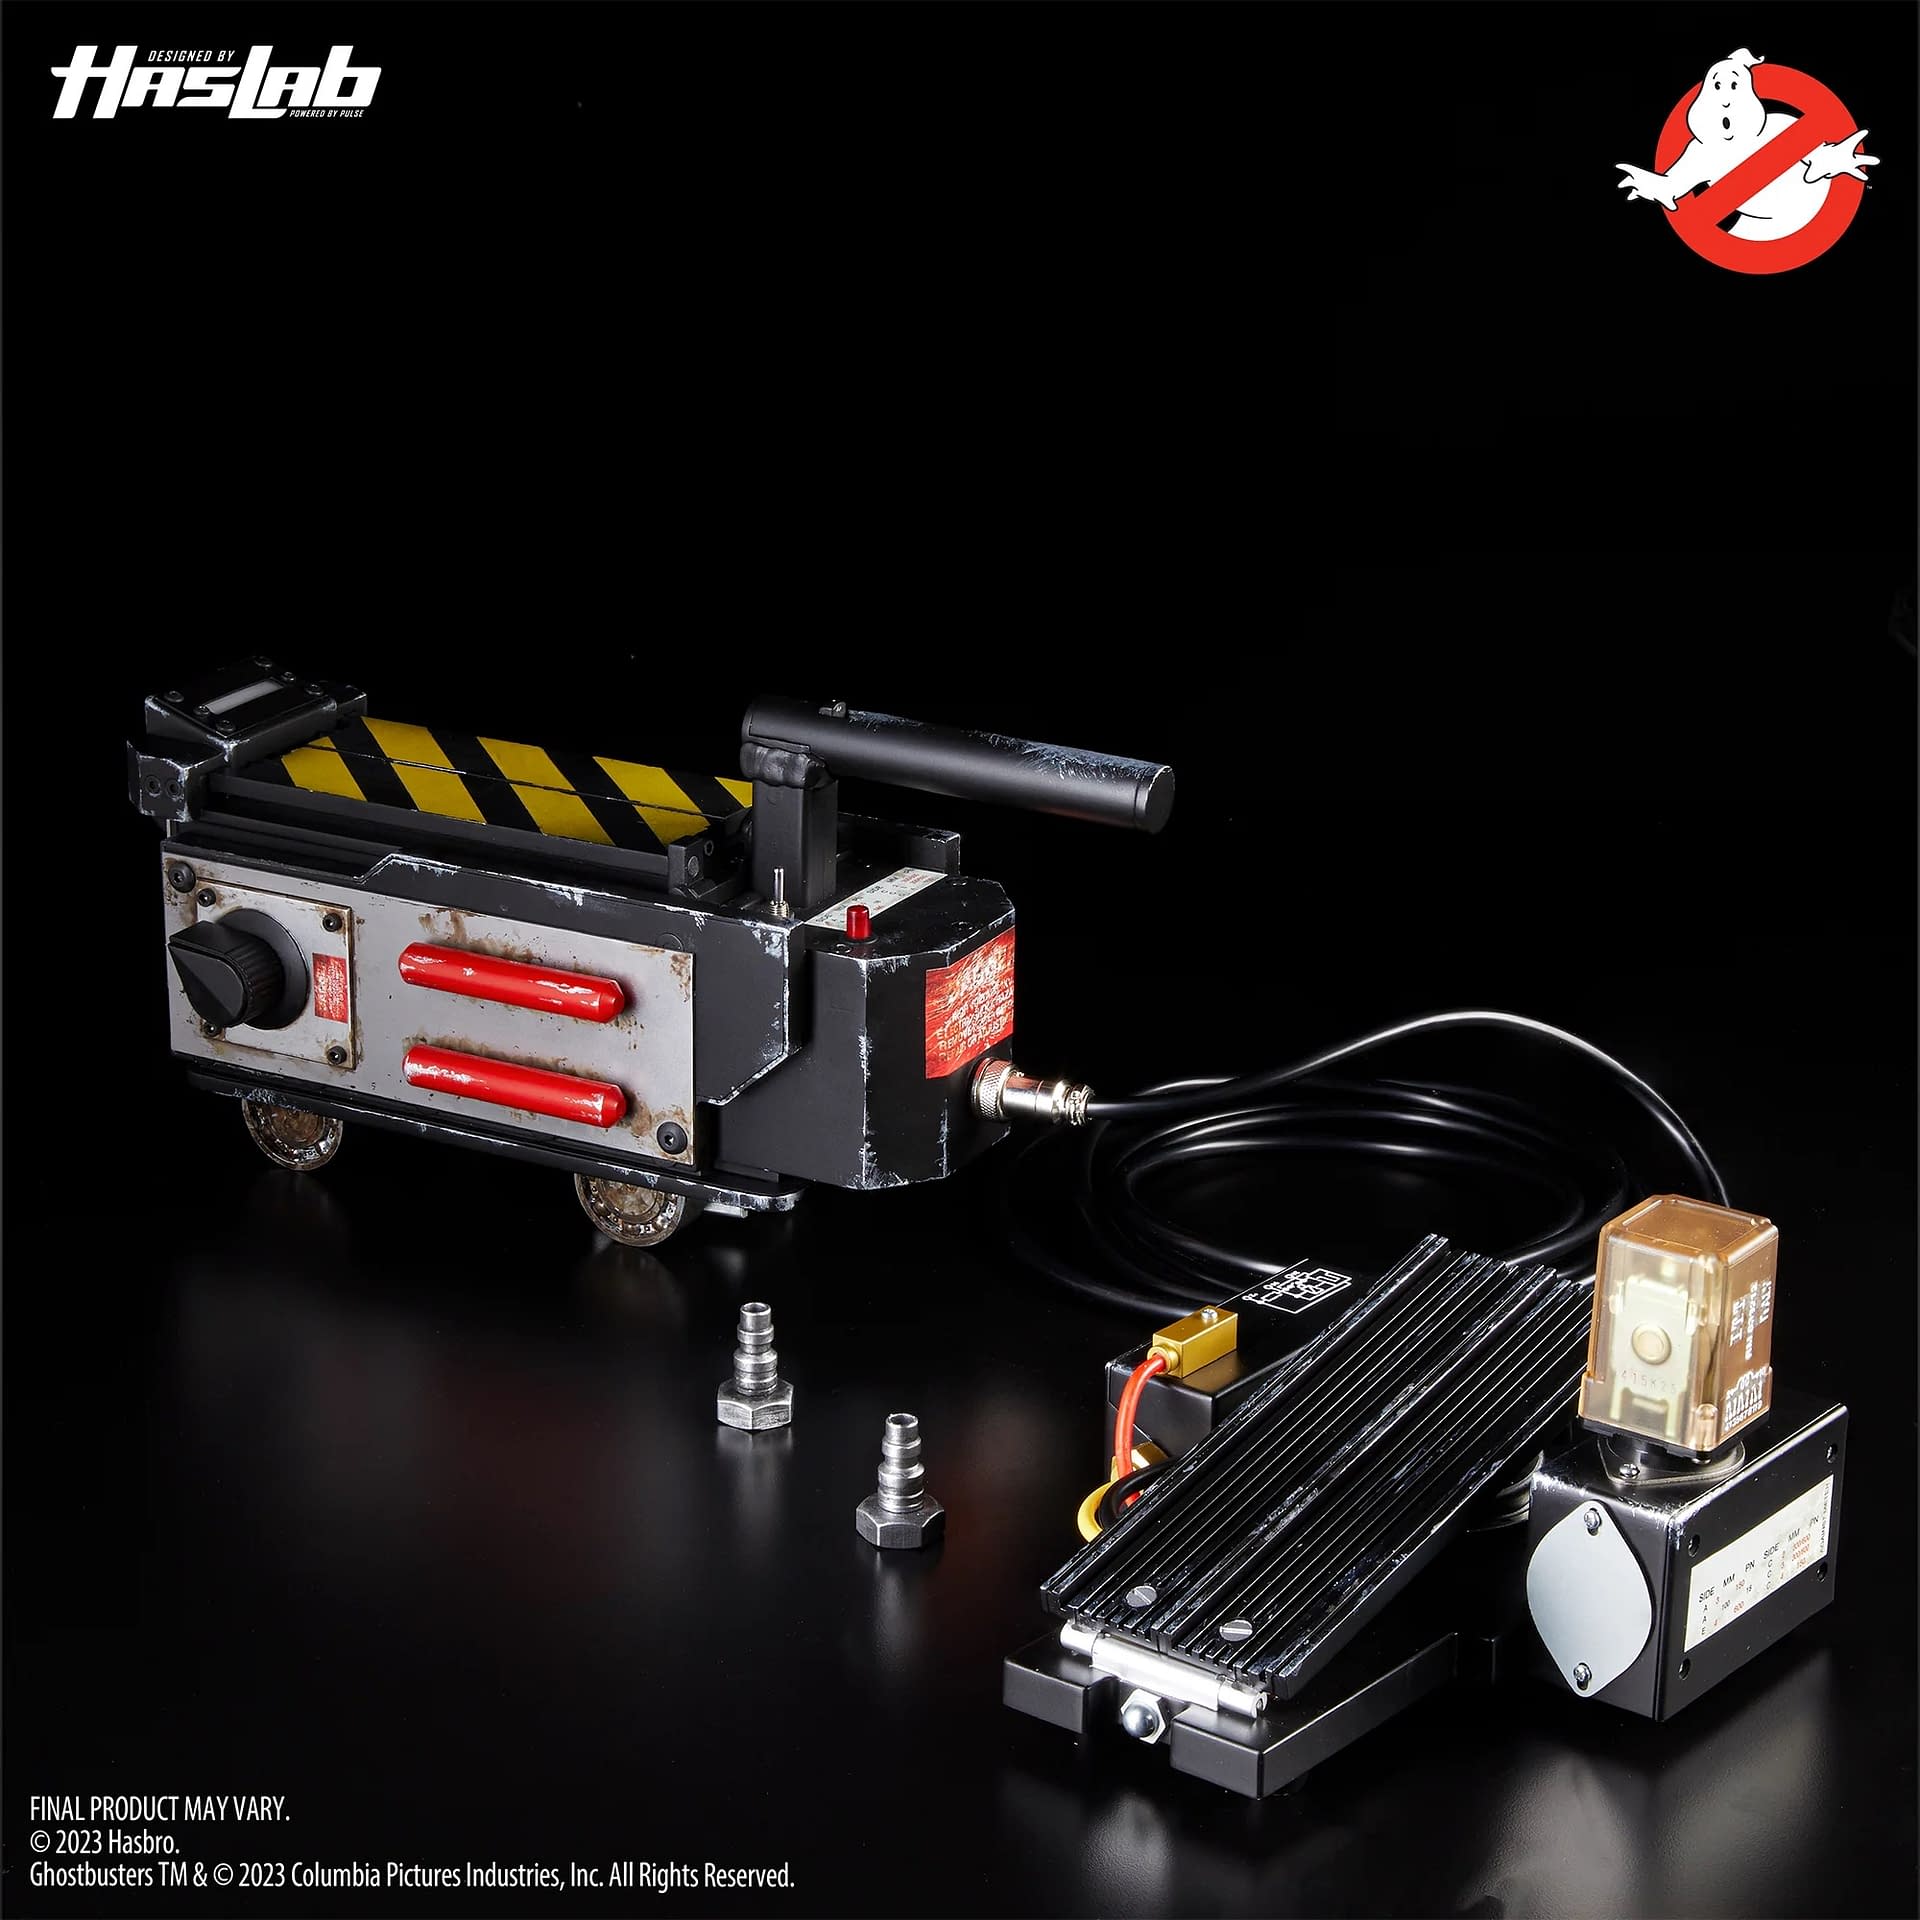 Hasbro Gets Spooky with Ghostbusters Plasma Series HasLab Two!